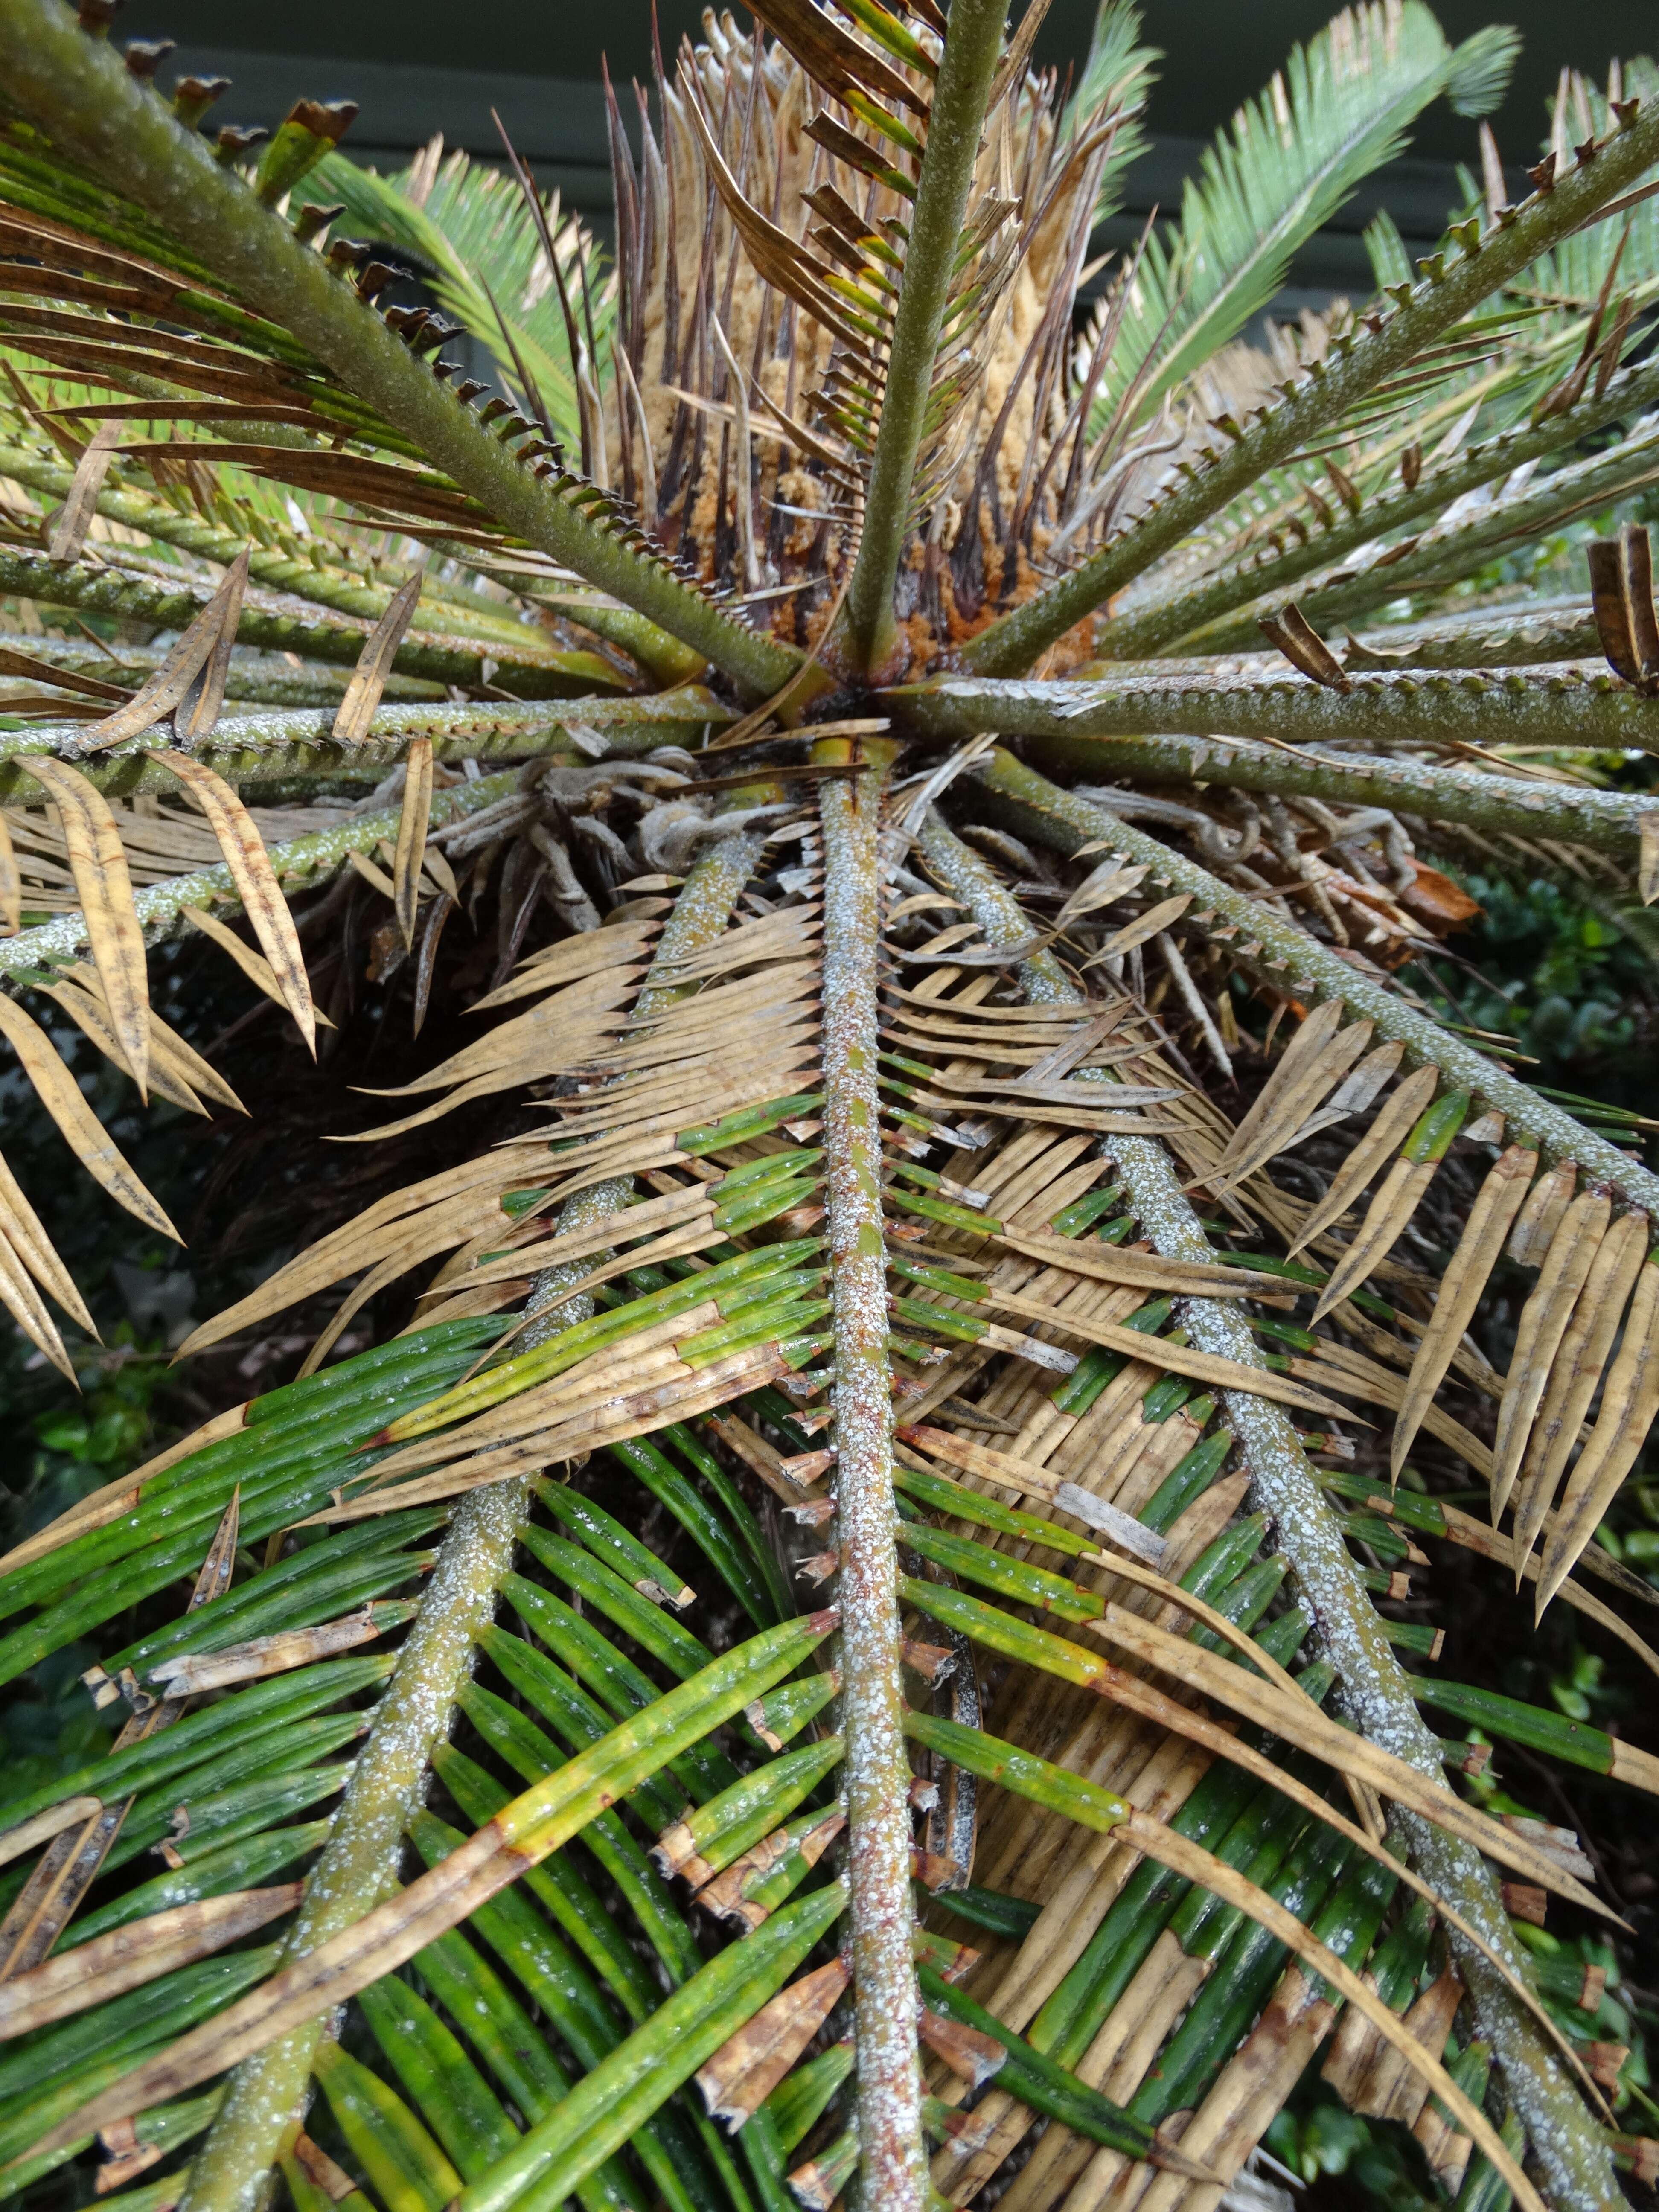 Image of Cycad aulacaspis scale